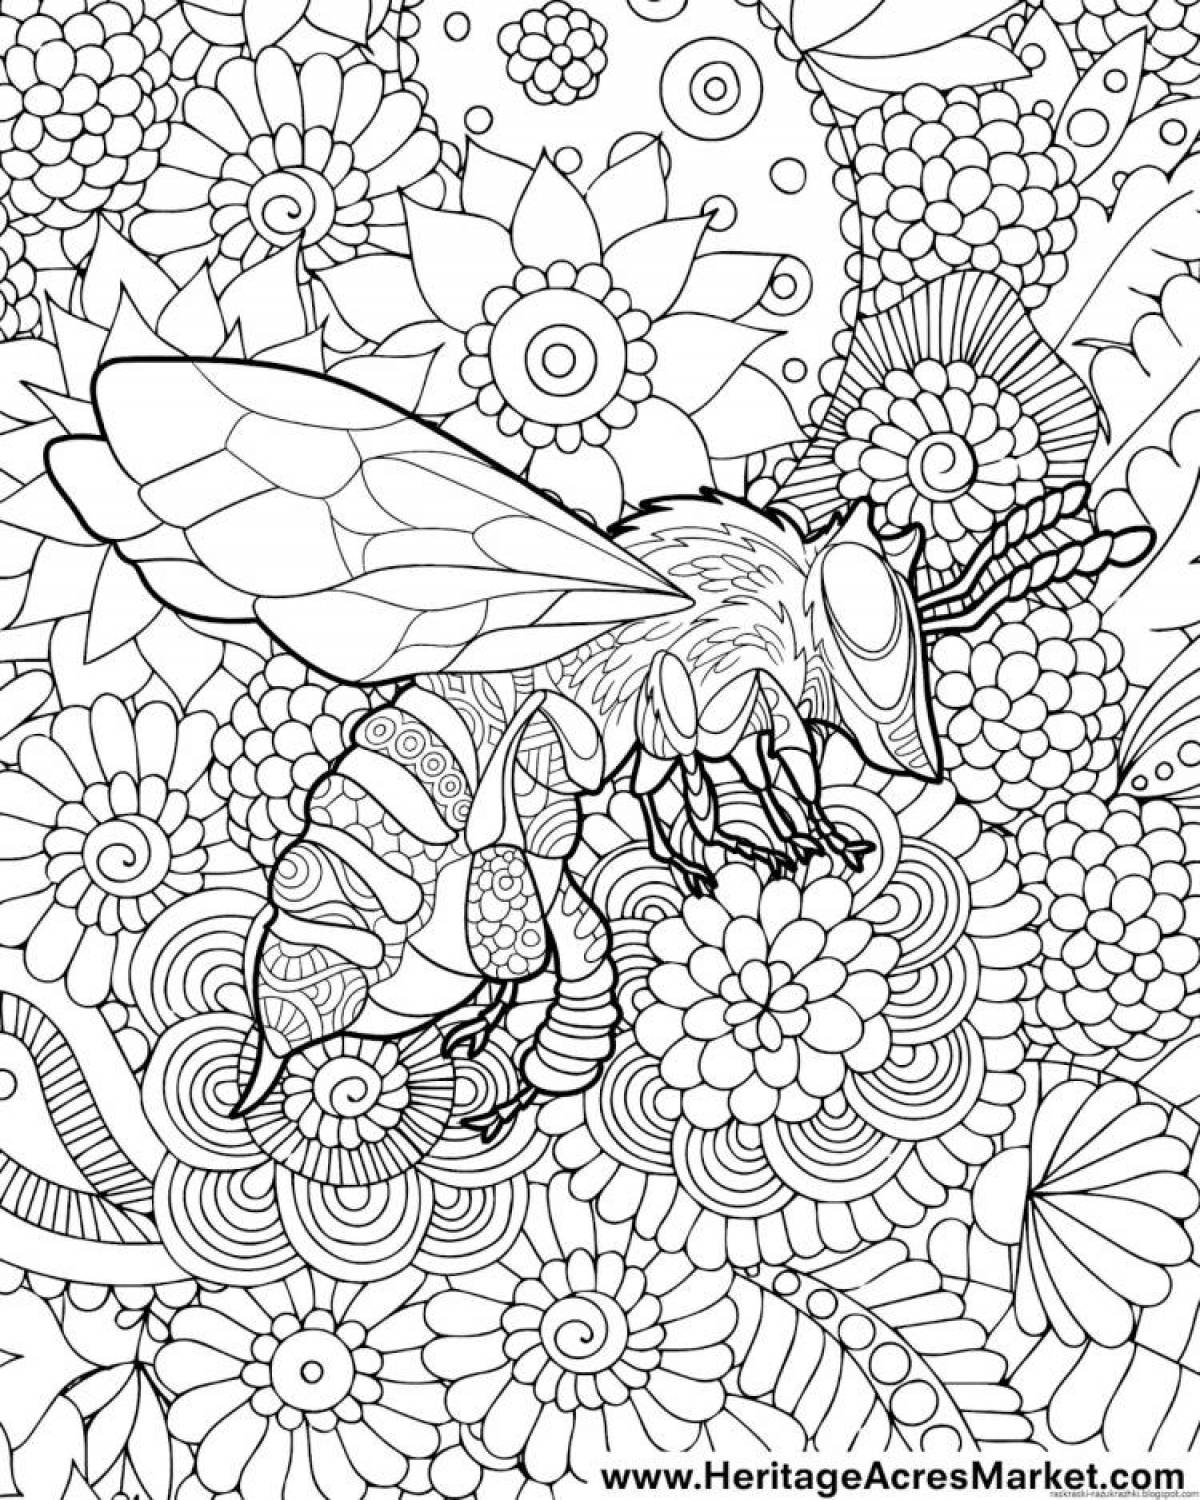 Colourful coloring book for adults